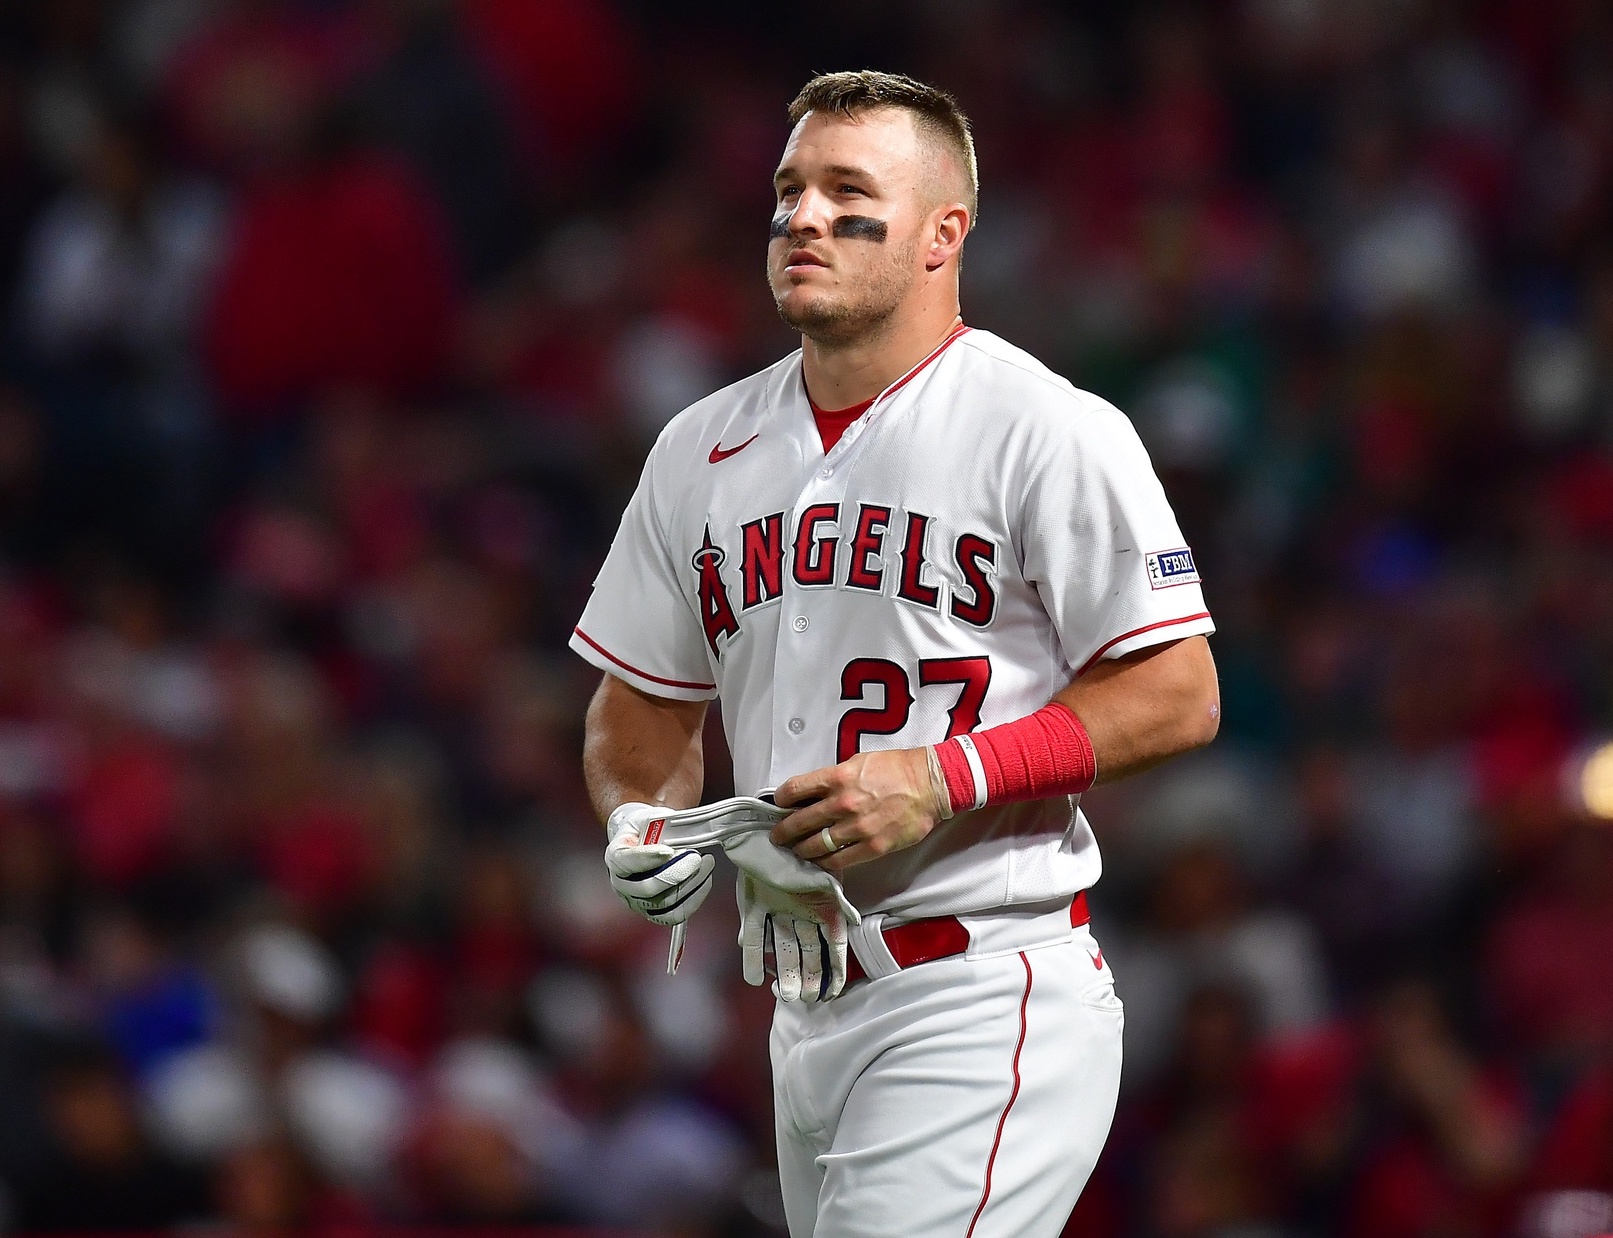 Angels Injury Update Mike Trout Out For Season After Move To 60Day IL